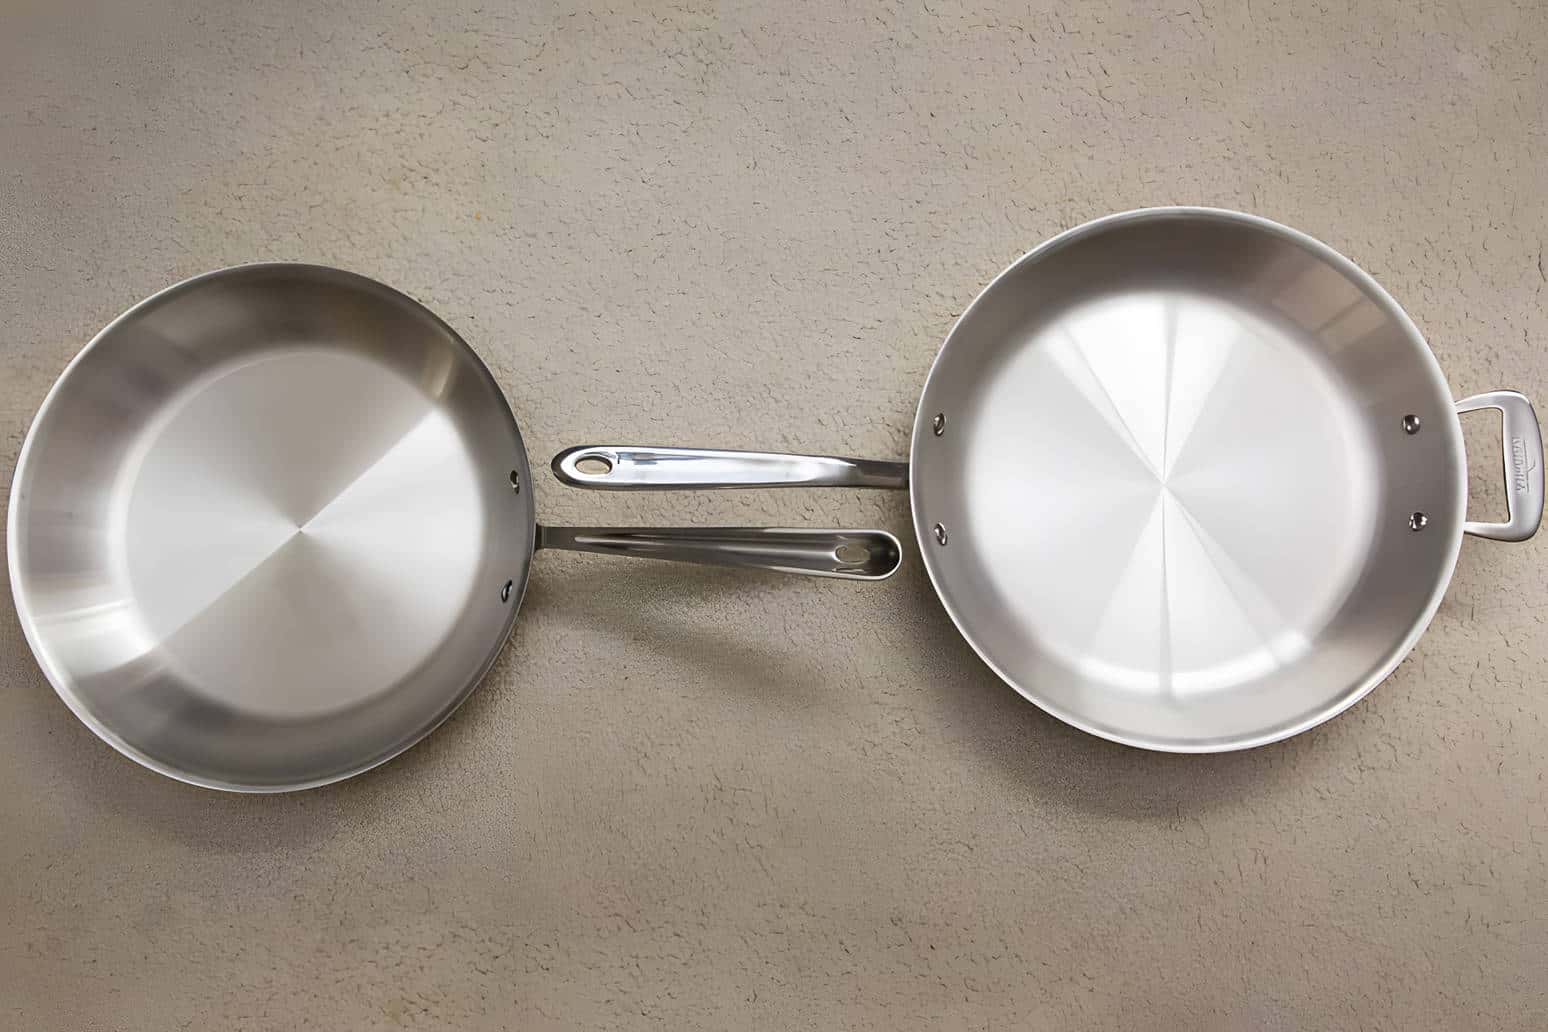 Other factors to consider when buying cookware